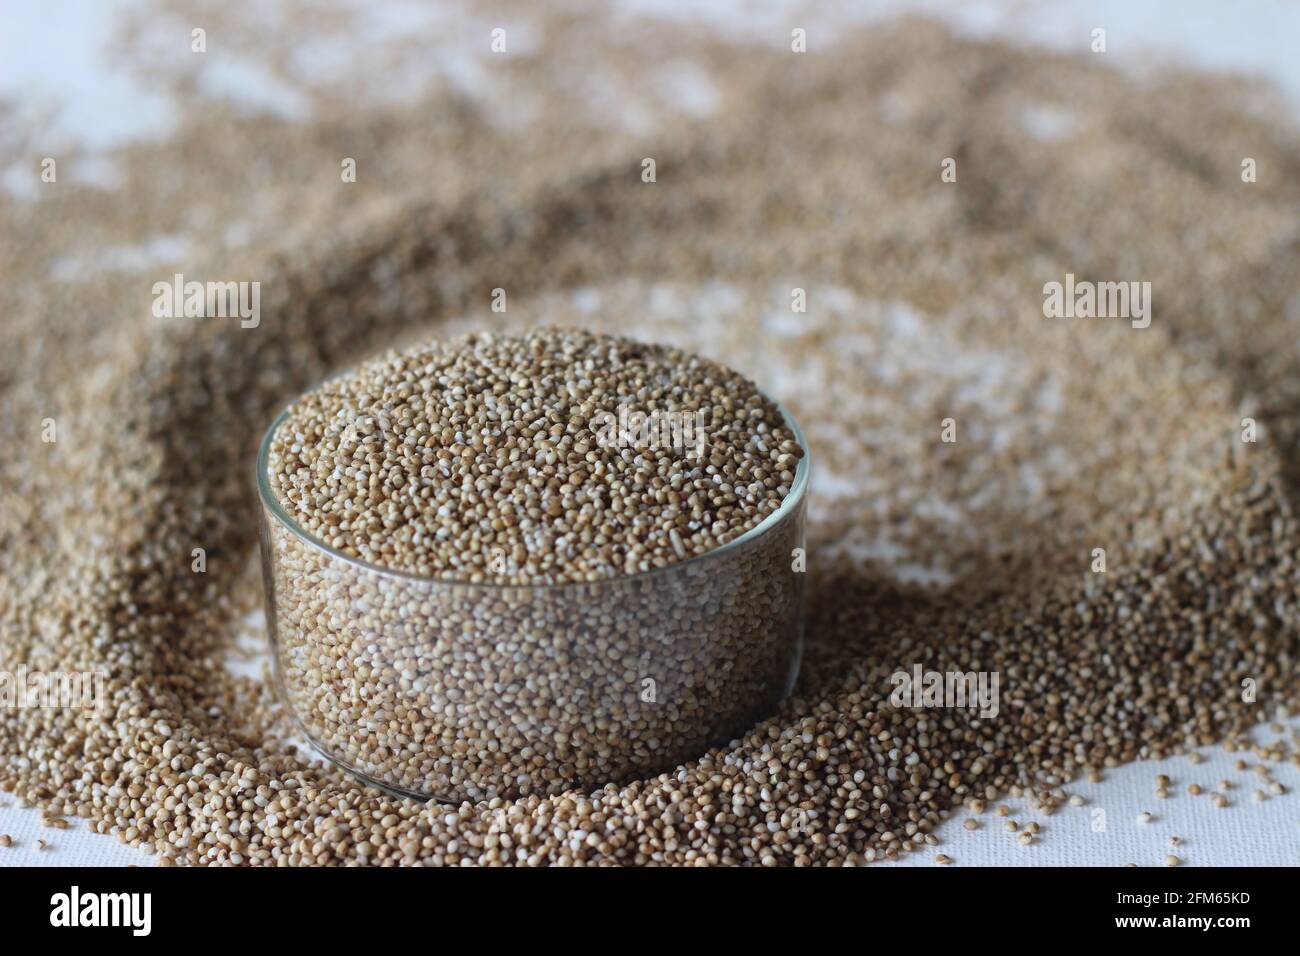 A spread of Paspalum scrobiculatum grains, commonly called Koda millet, is an annual grain that is grown primarily in Nepal, India, East Asia and in W Stock Photo